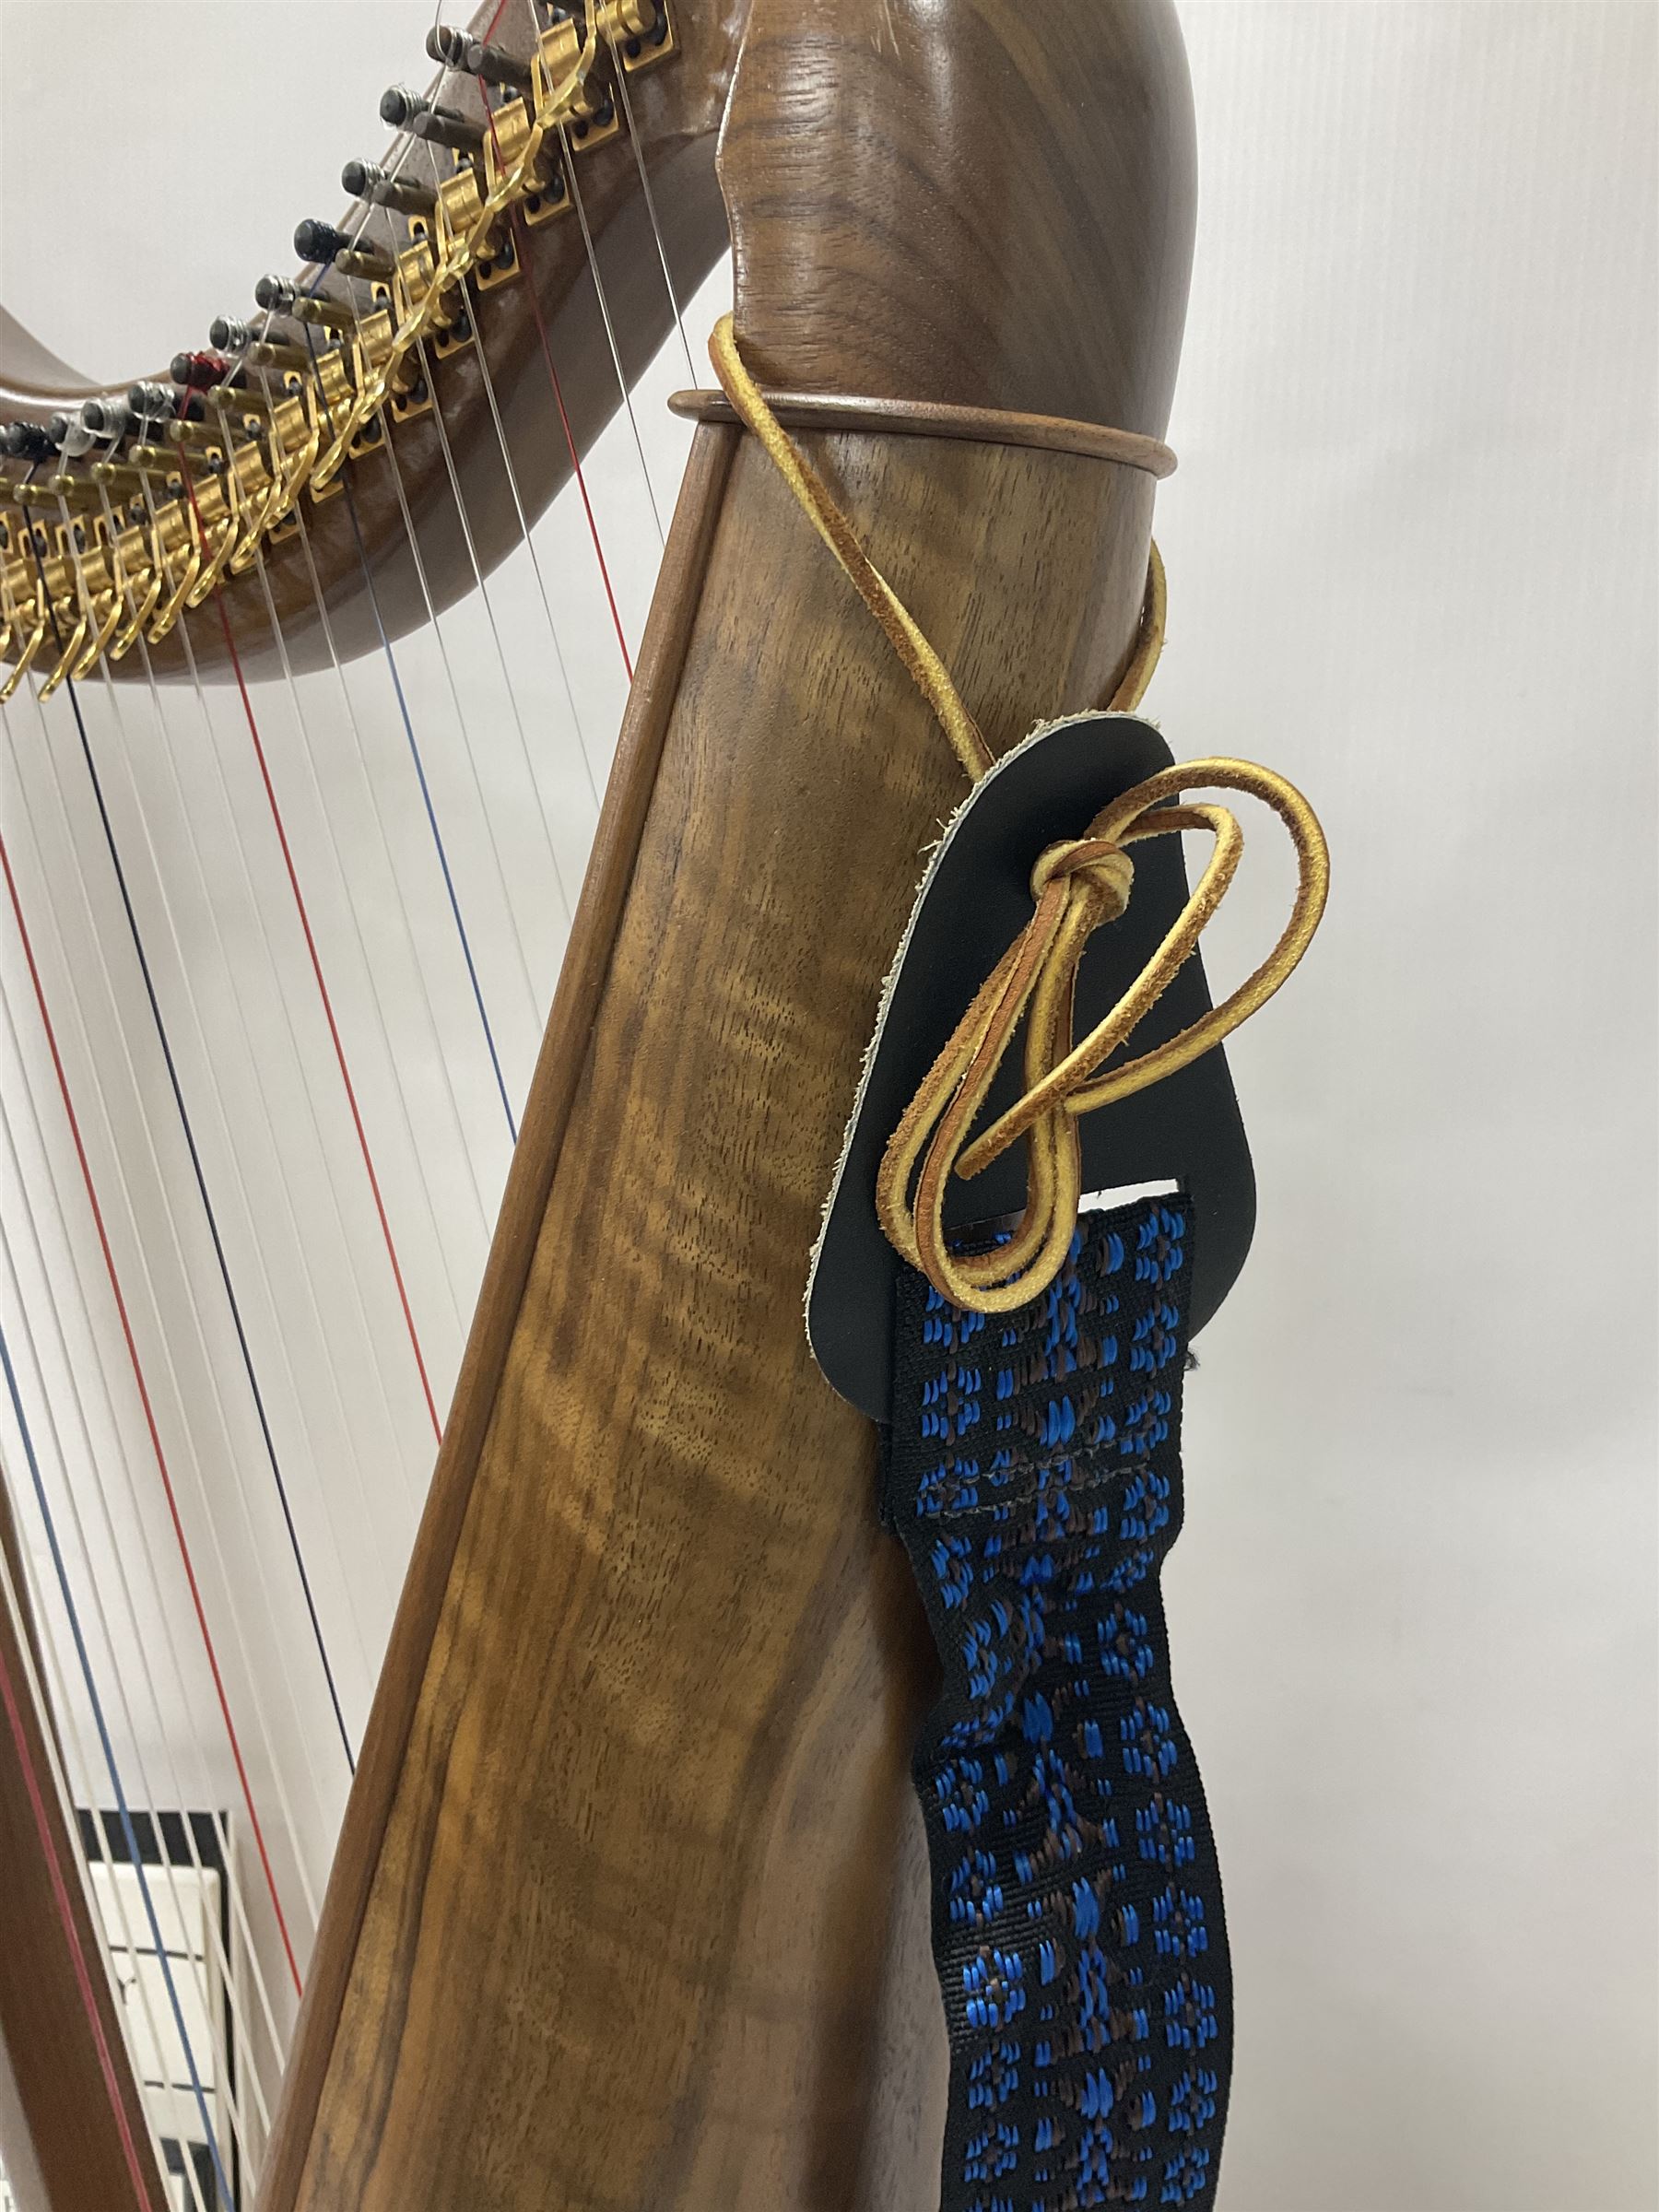 Contemporary 24 string Celtic or Irish Folk Harp with an Ash soundboard and 24 sharpening keys - Image 5 of 15